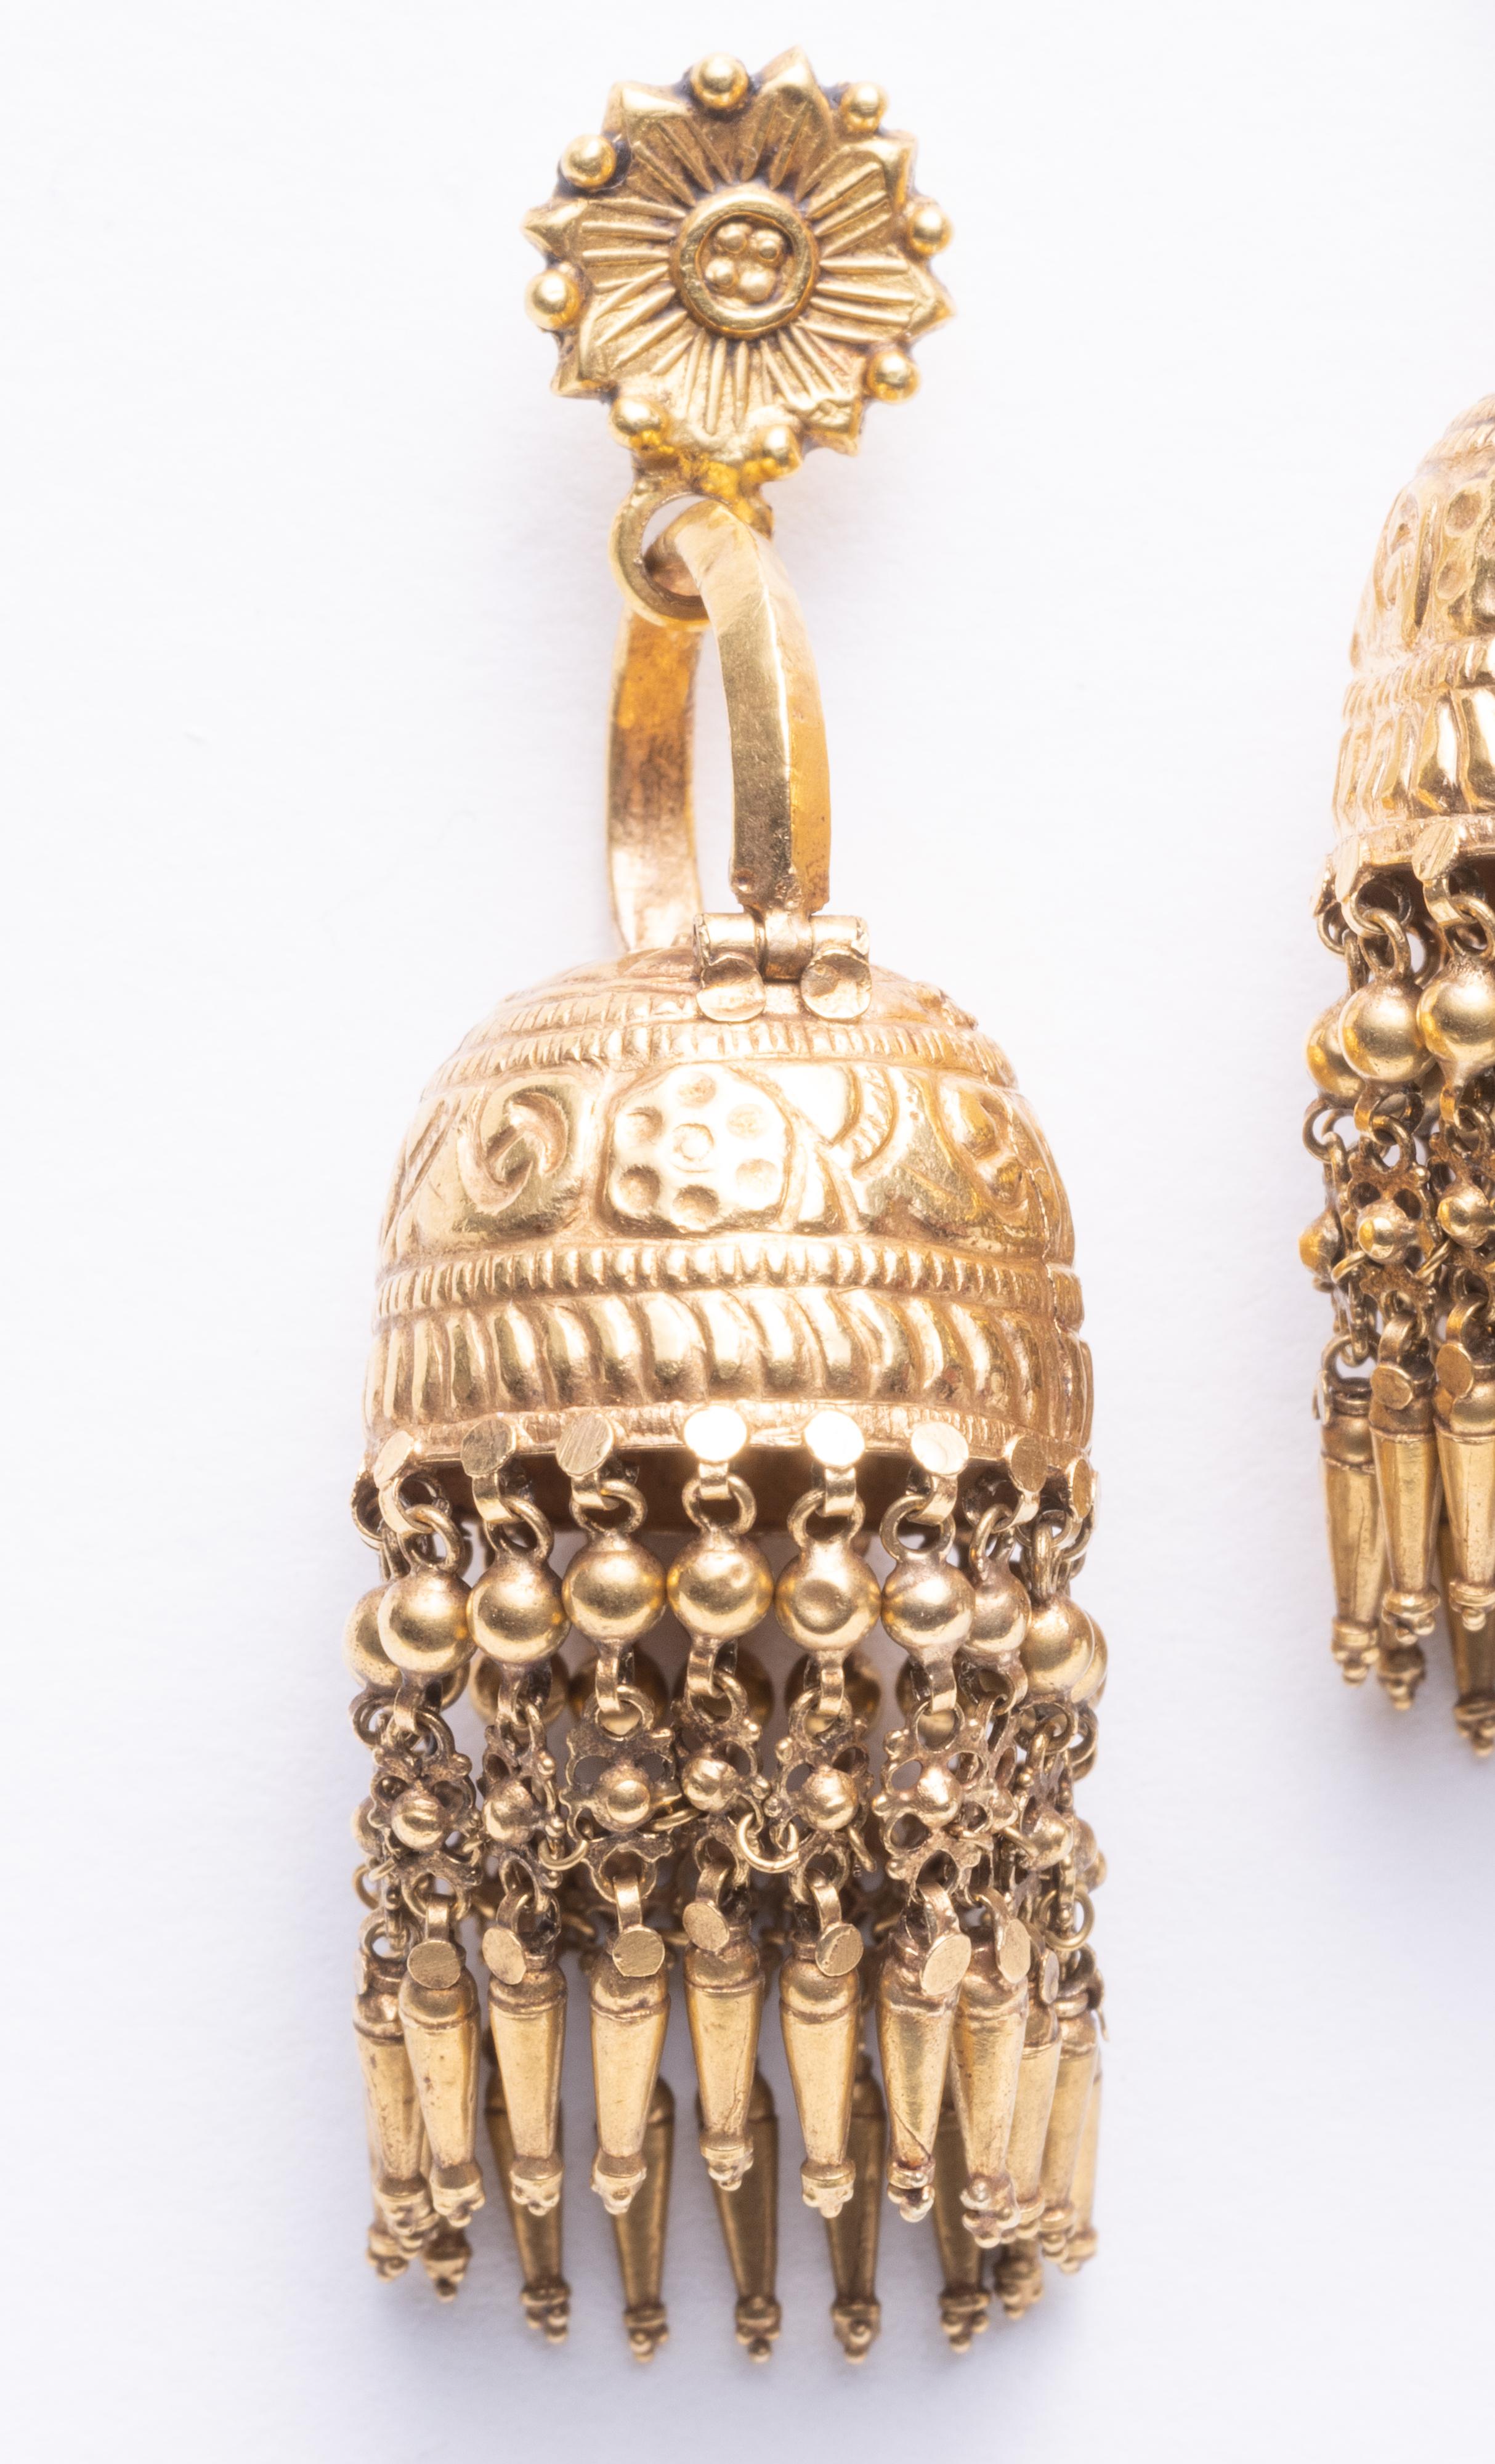 An intricately hand-tooled Indian chandelier earrings.  These normally would have been worn using the hinged curved bar, but for western use, we added the floral motif post for pierced ears.  Lovely movement with the dangling lower portion.